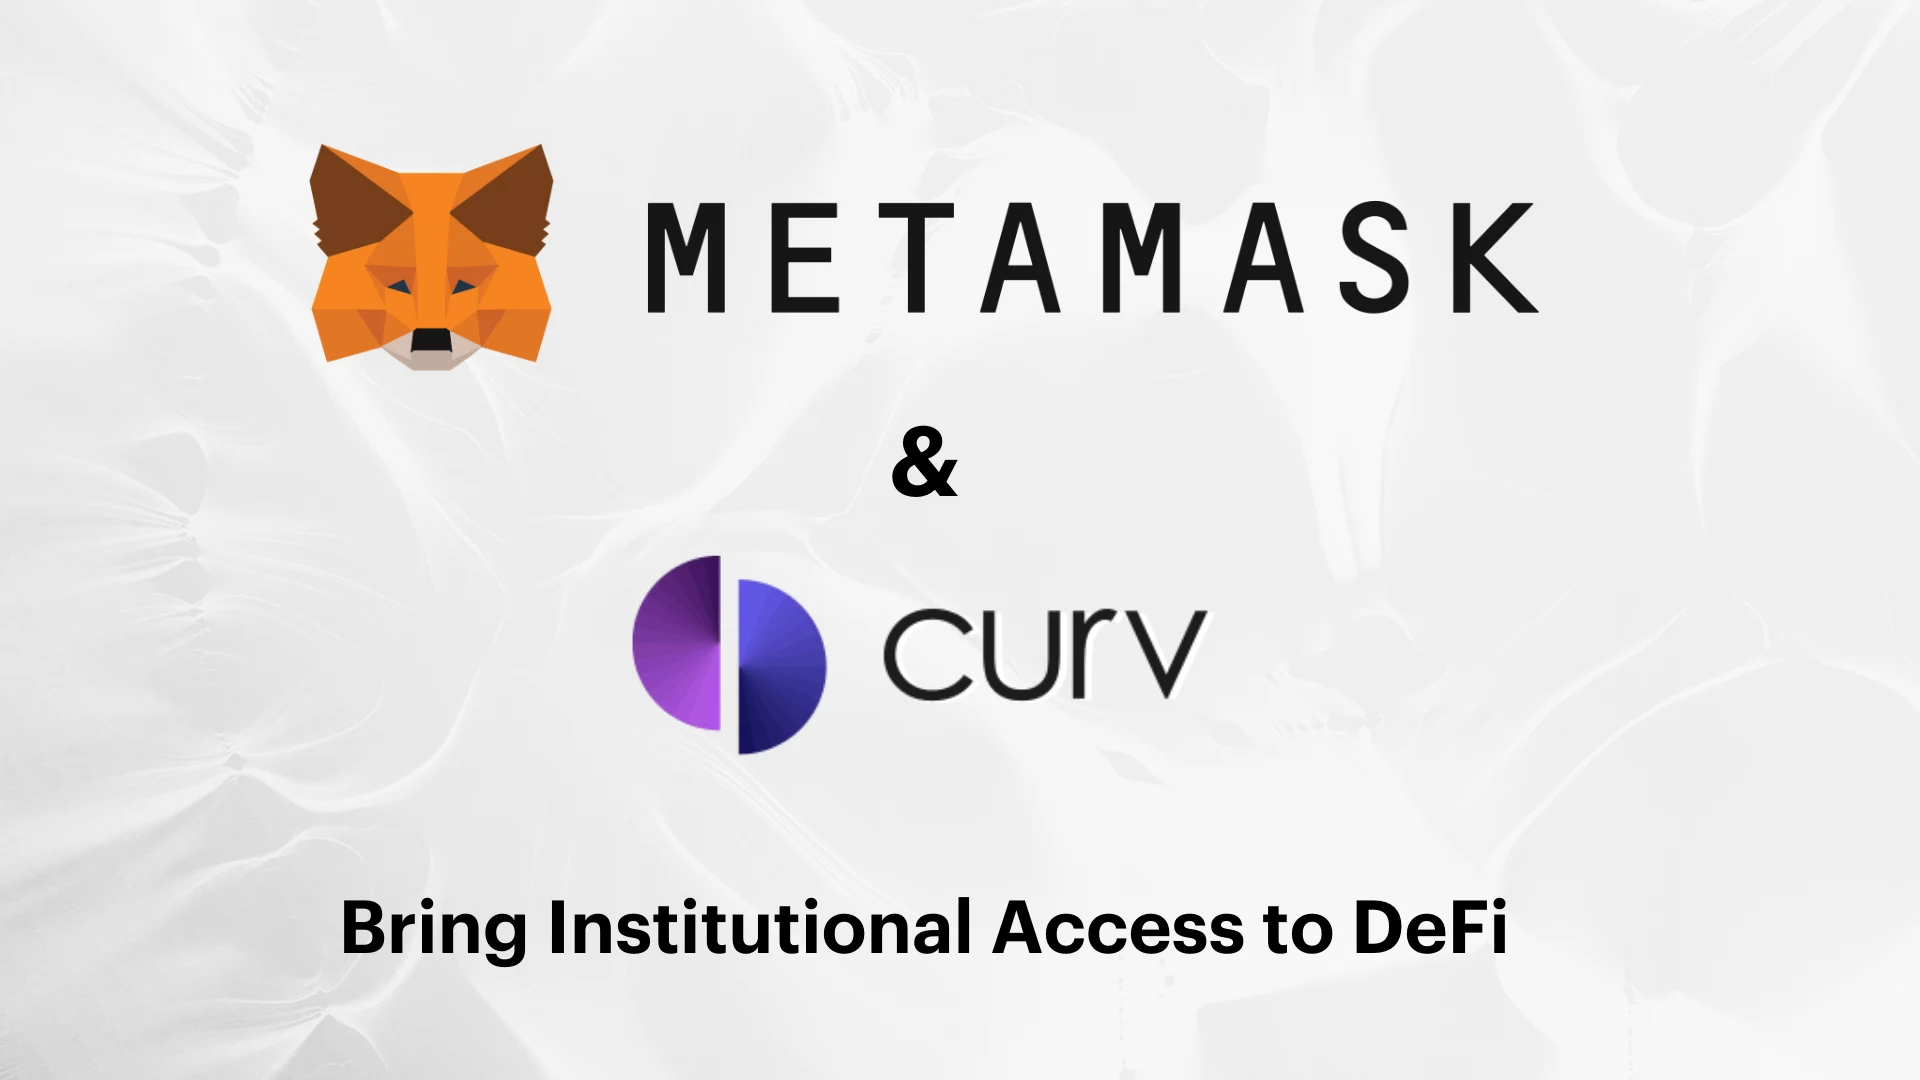 Image: MetaMask Early Adopter Program Enables Institutional Access to DeFi